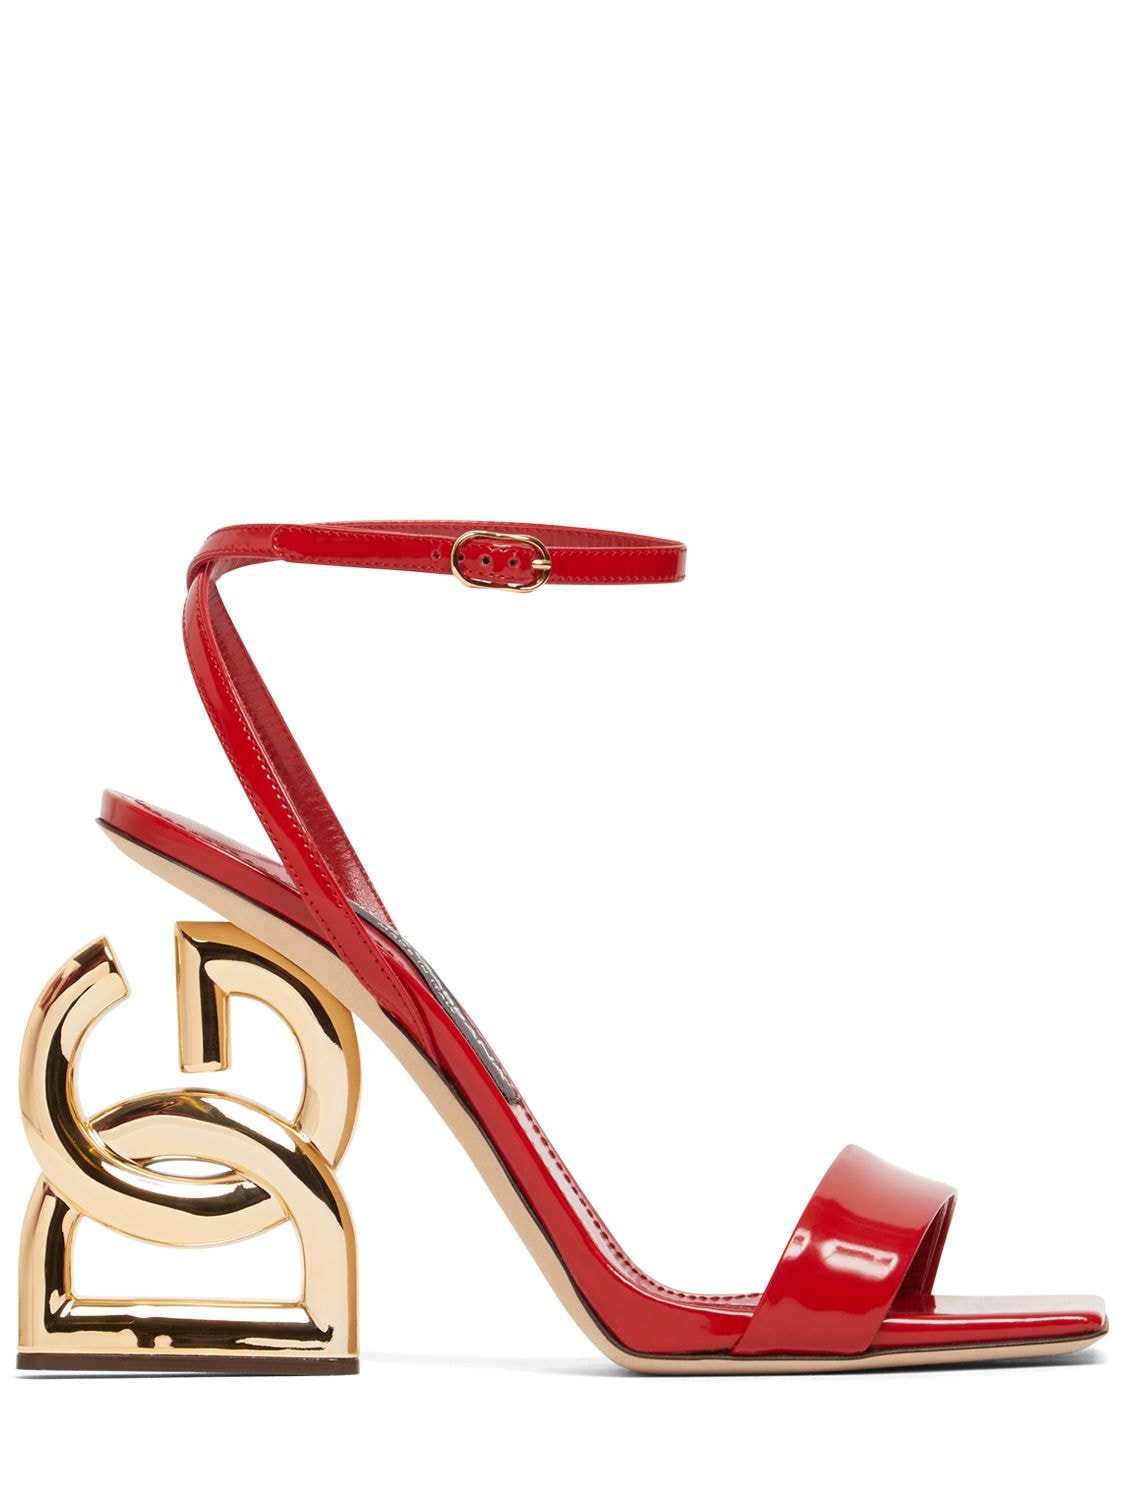 DOLCE & GABBANA 105MM PATENT LEATHER SANDALS